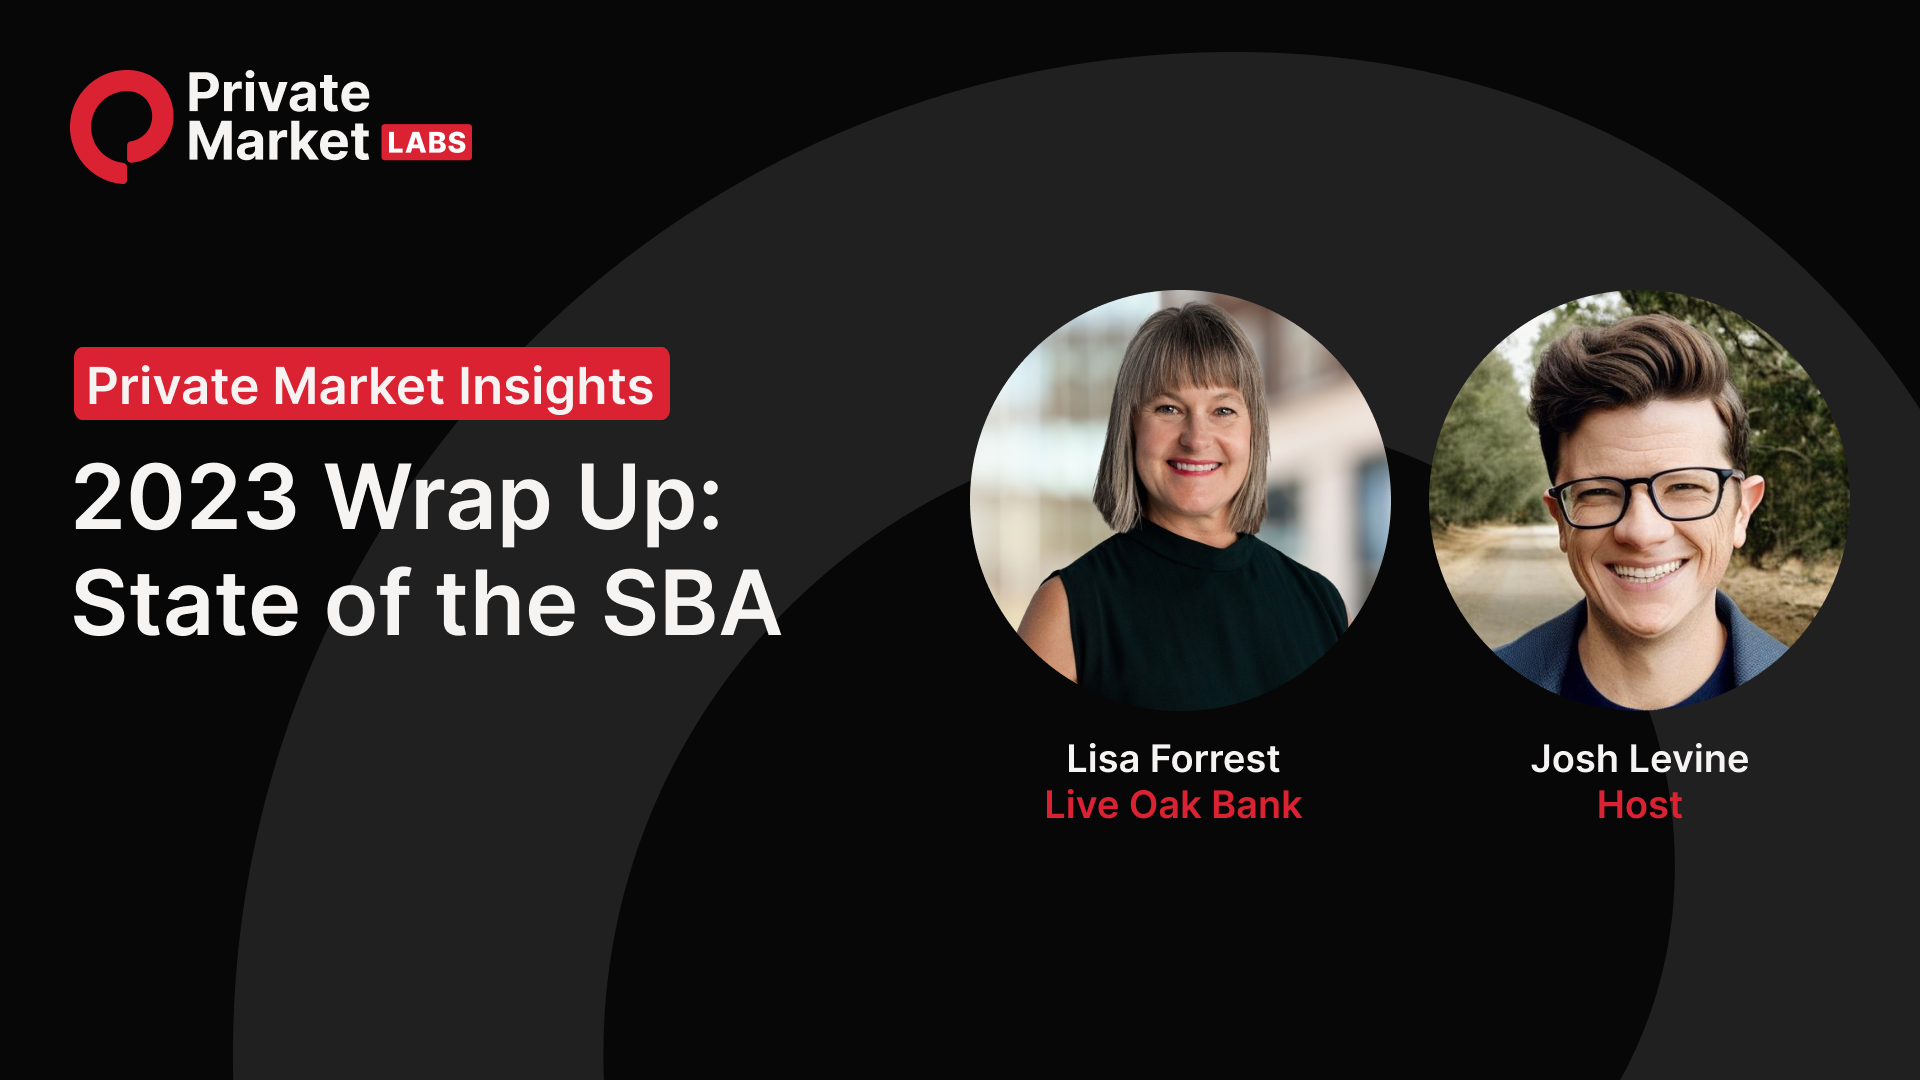 2023 Wrap Up: State of the SBA with Lisa Forrest and Sarah Andrews